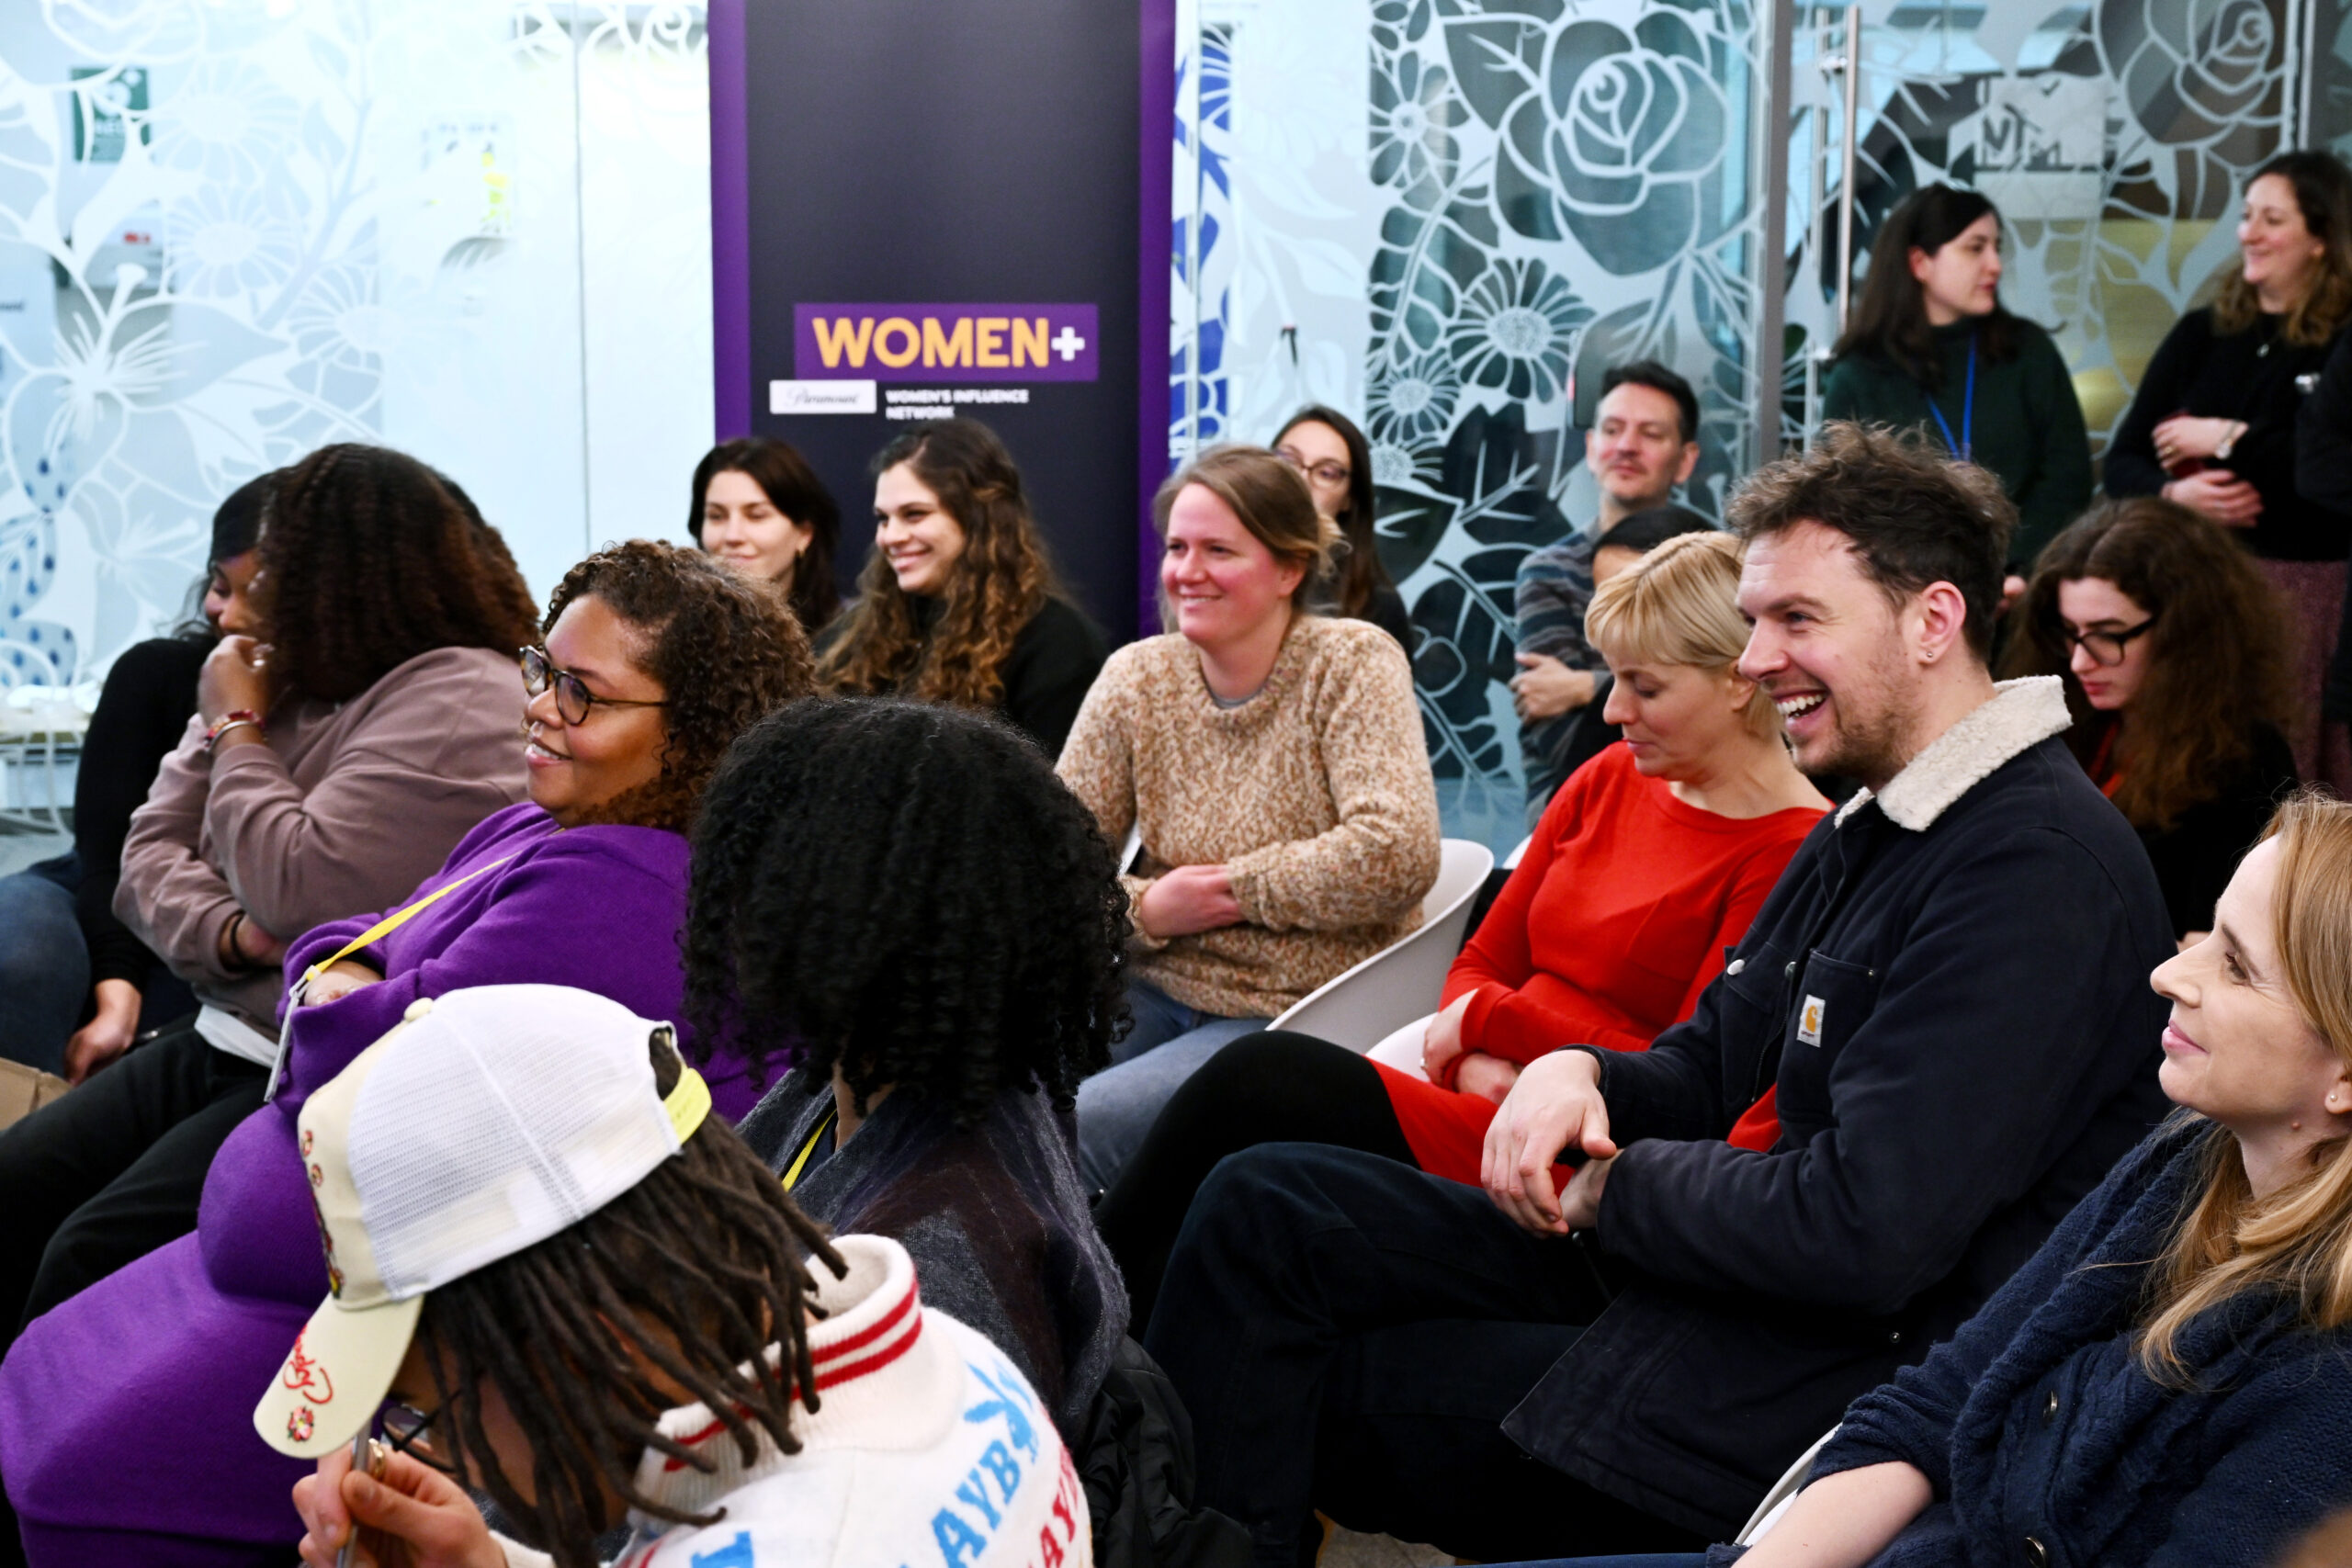 Paramount media employees in the UK celebrate interational women’s day